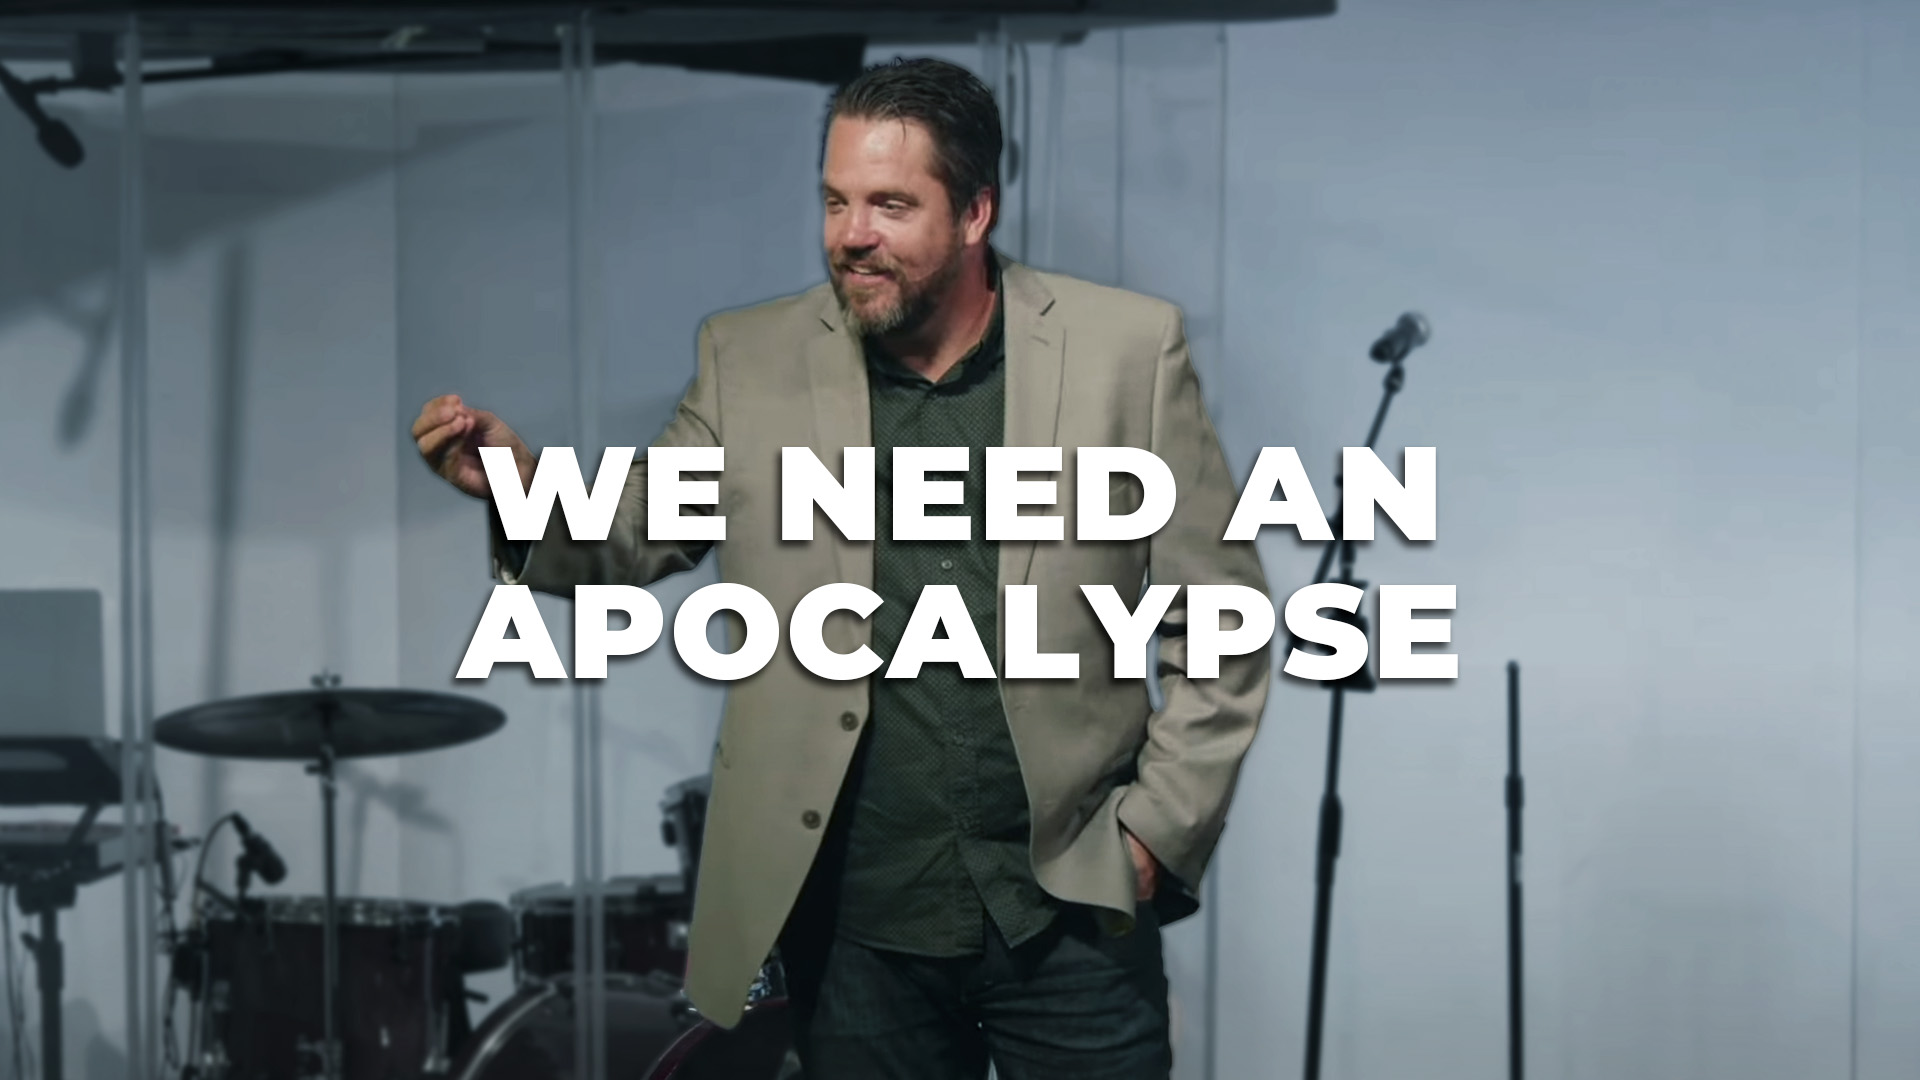 Featured image for “We Need an Apocalypse”